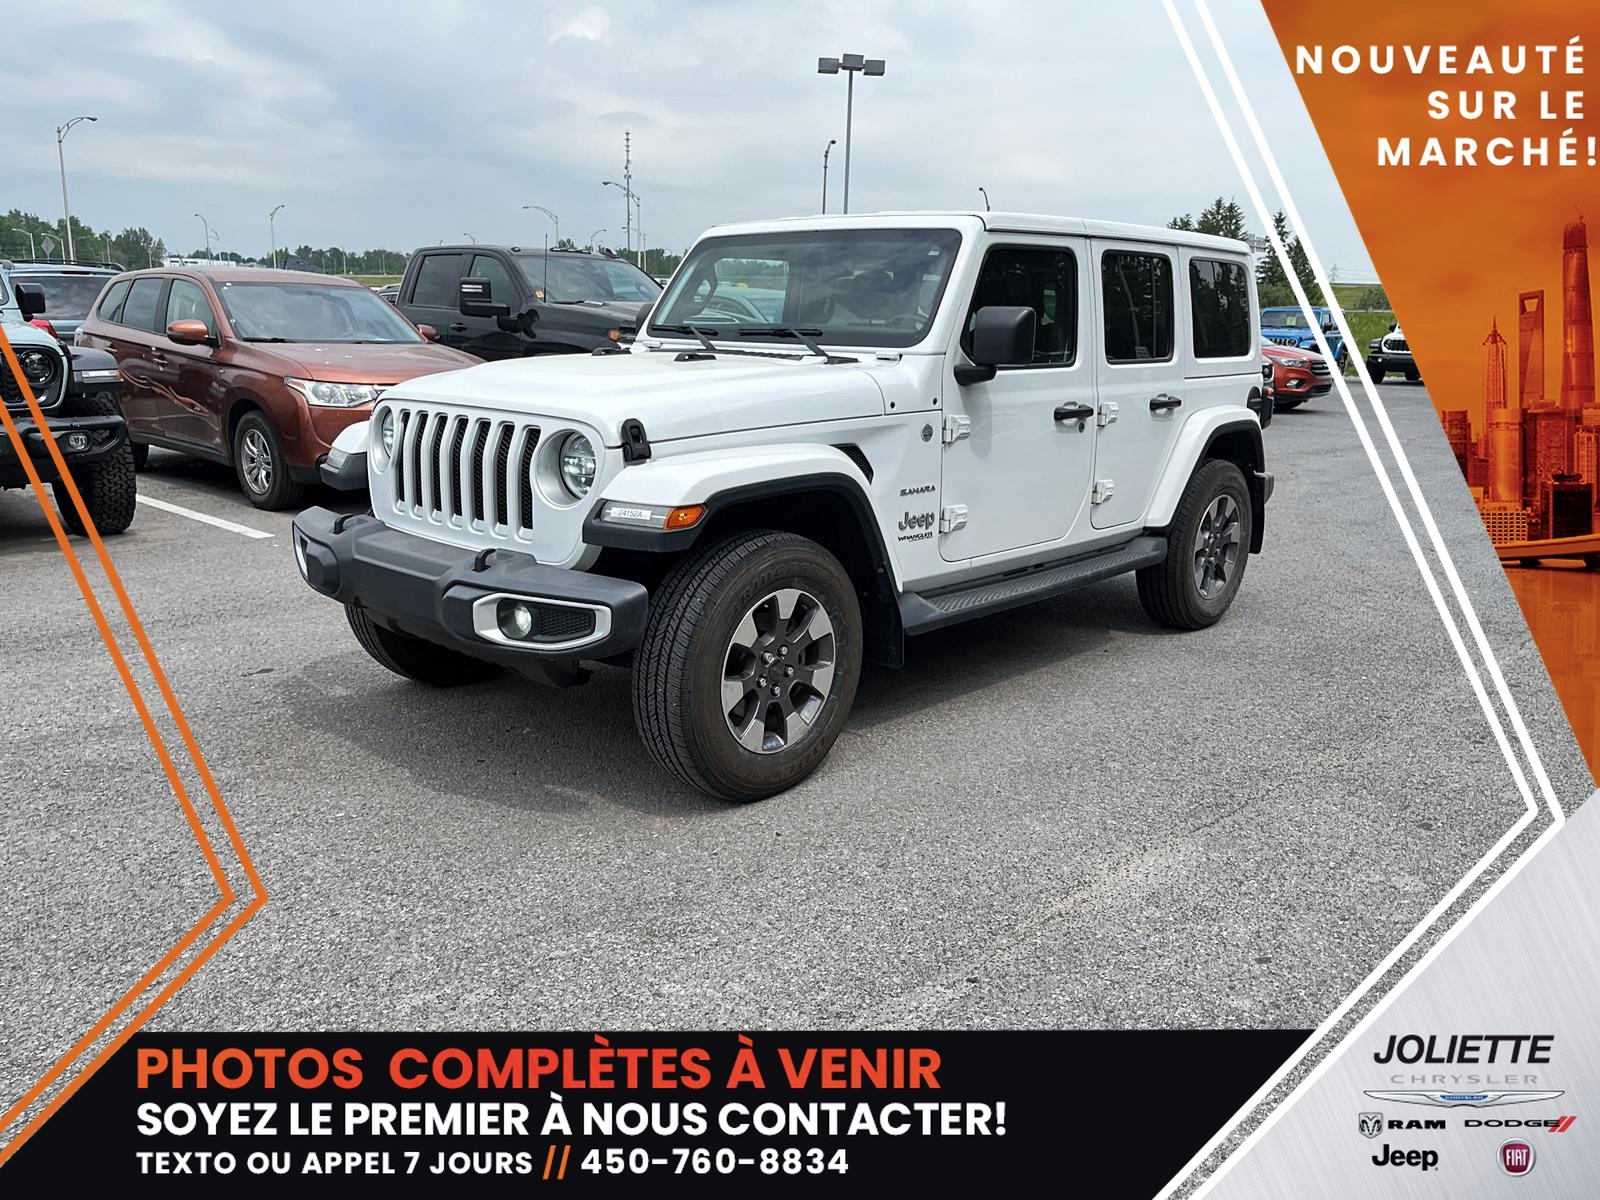 2021 Jeep Wrangler UNLIMITED SAHARA 4 CYL TURBO ENS TEMPS FROID